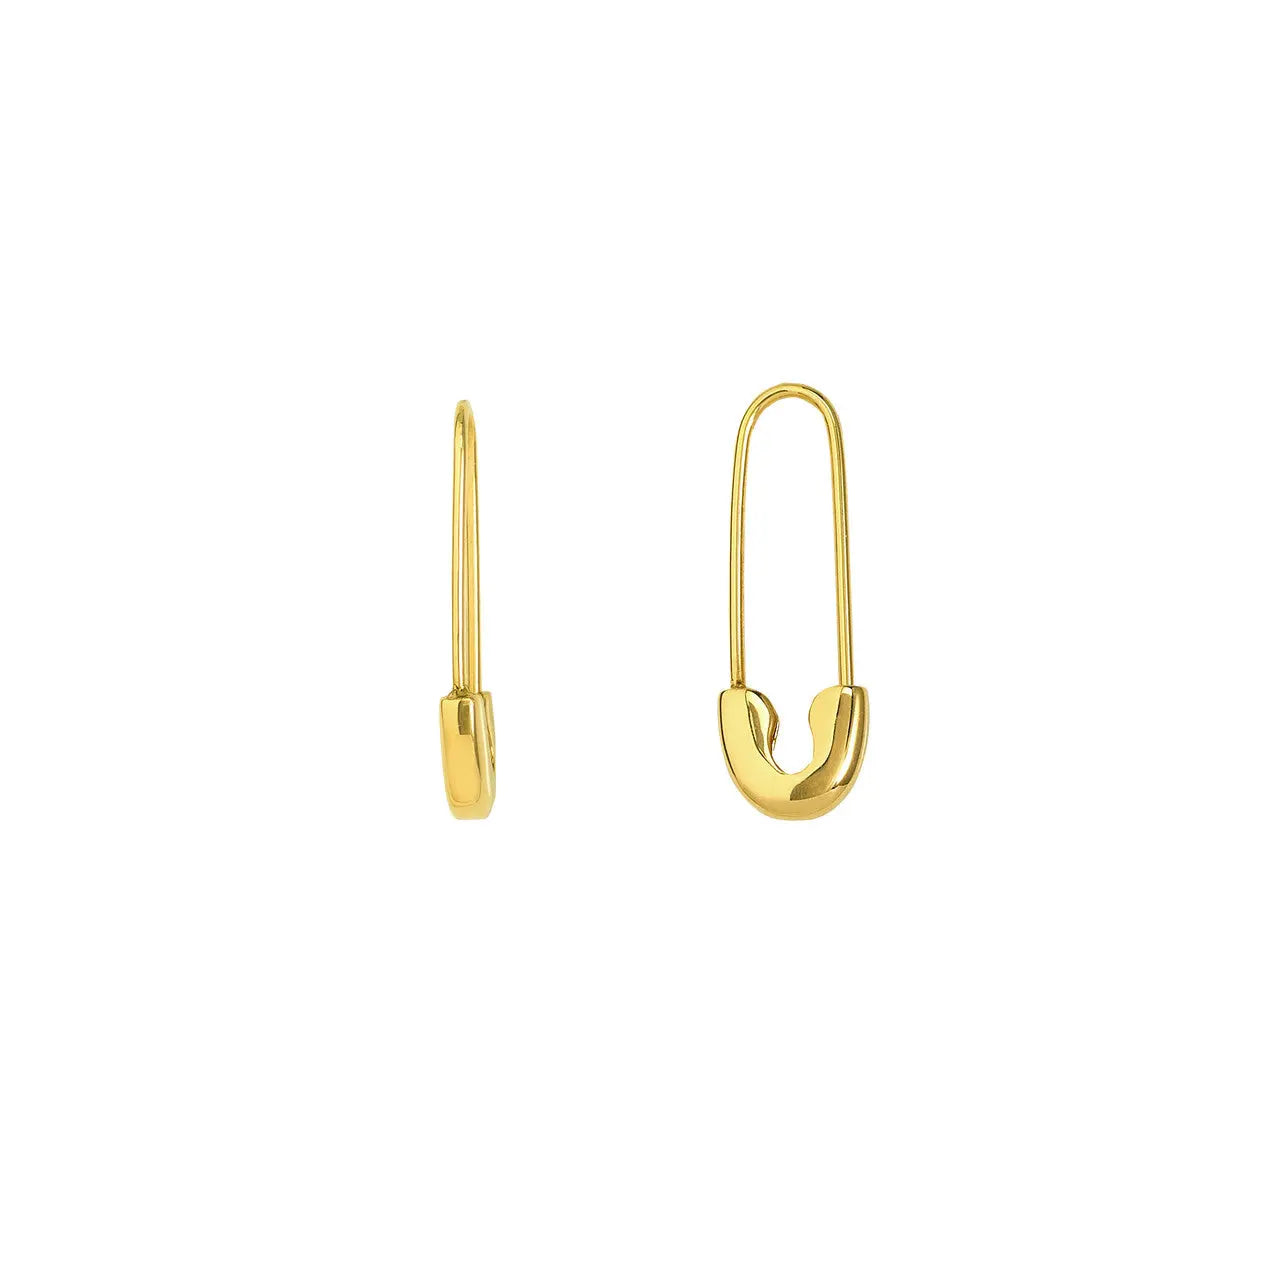 Safety Pin Threader Earrings